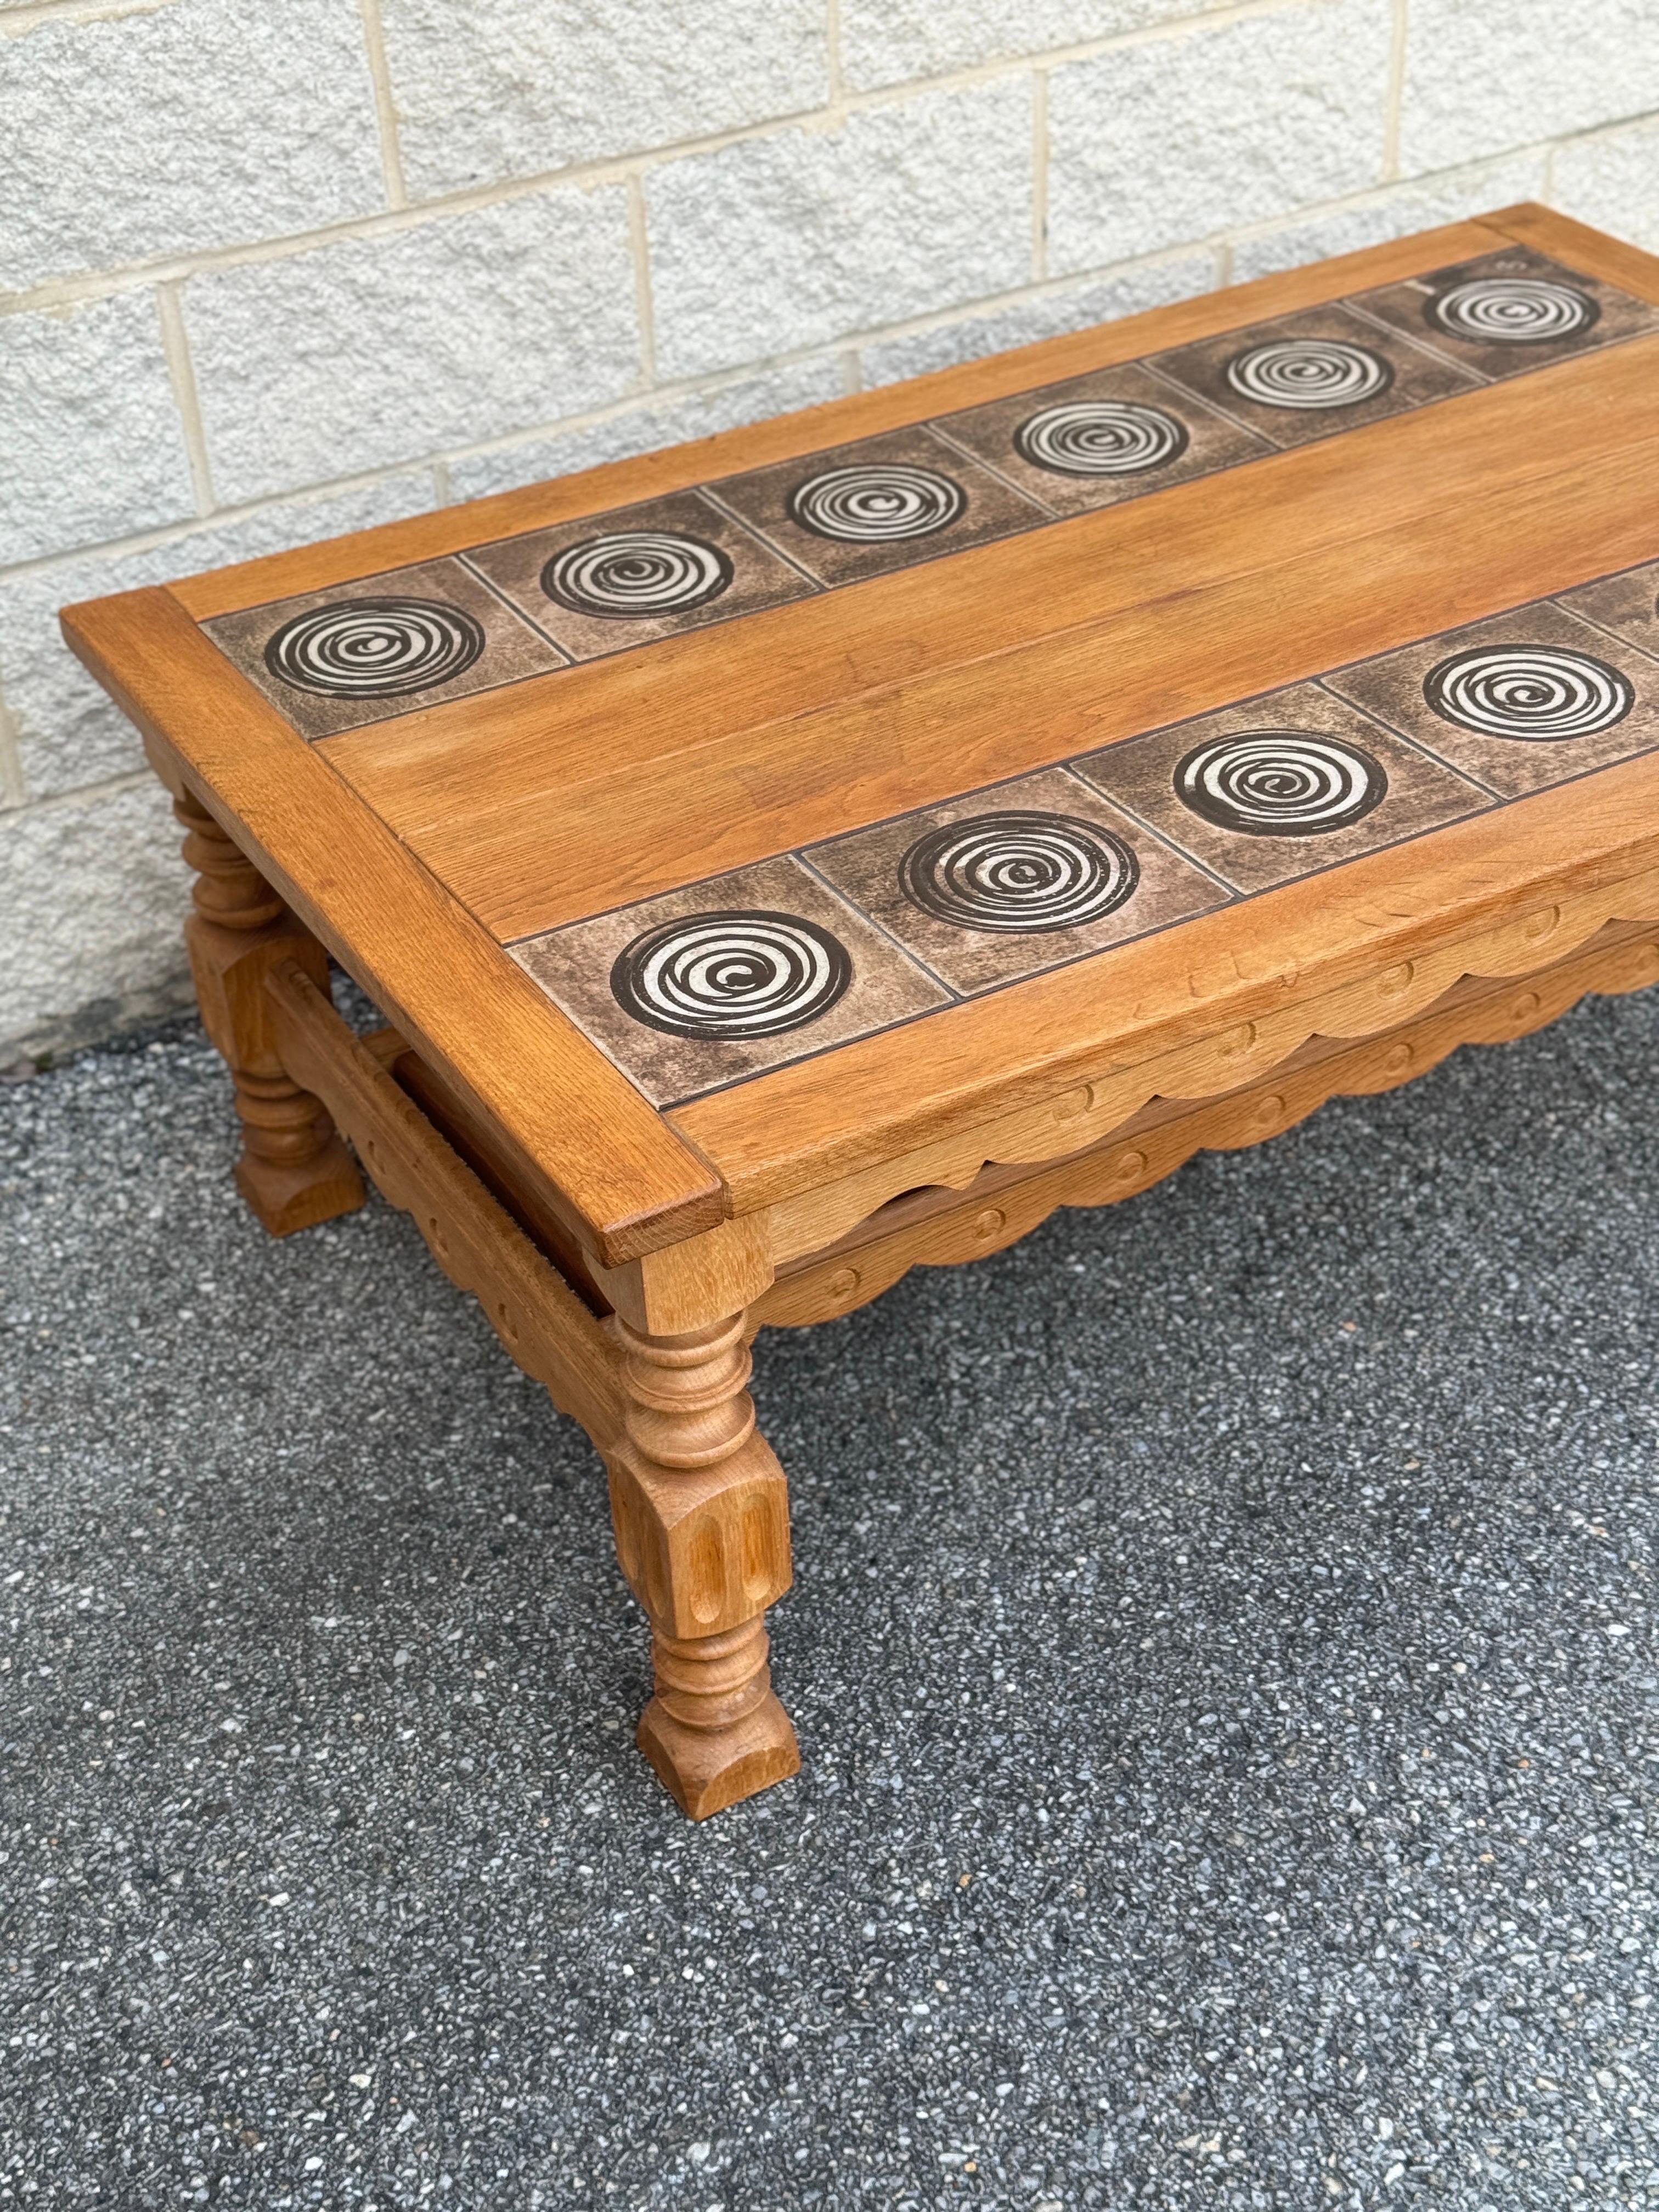 Vintage Danish piece made of oak, featuring chunky carved legs and a tile top. The tiles showcase a swirl design and are marked 